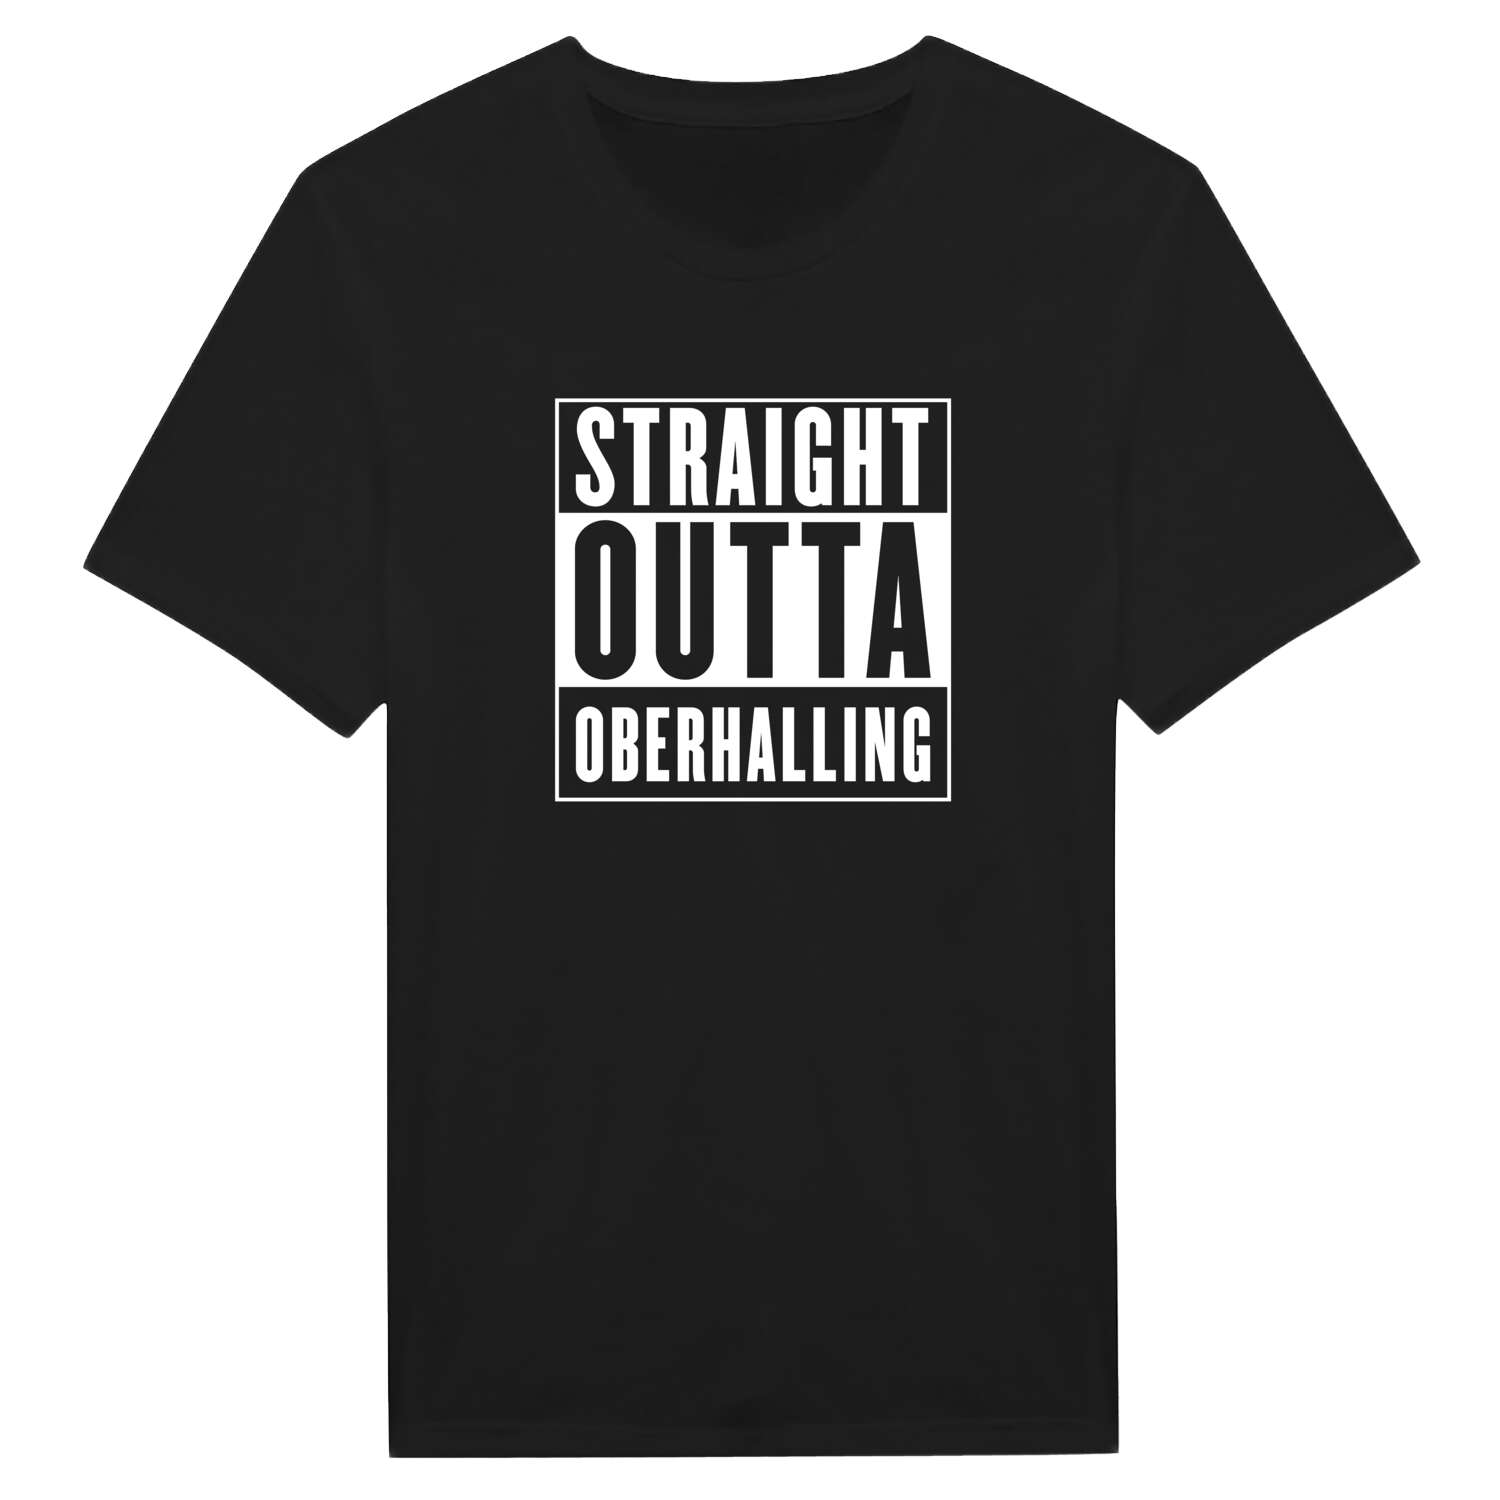 Oberhalling T-Shirt »Straight Outta«